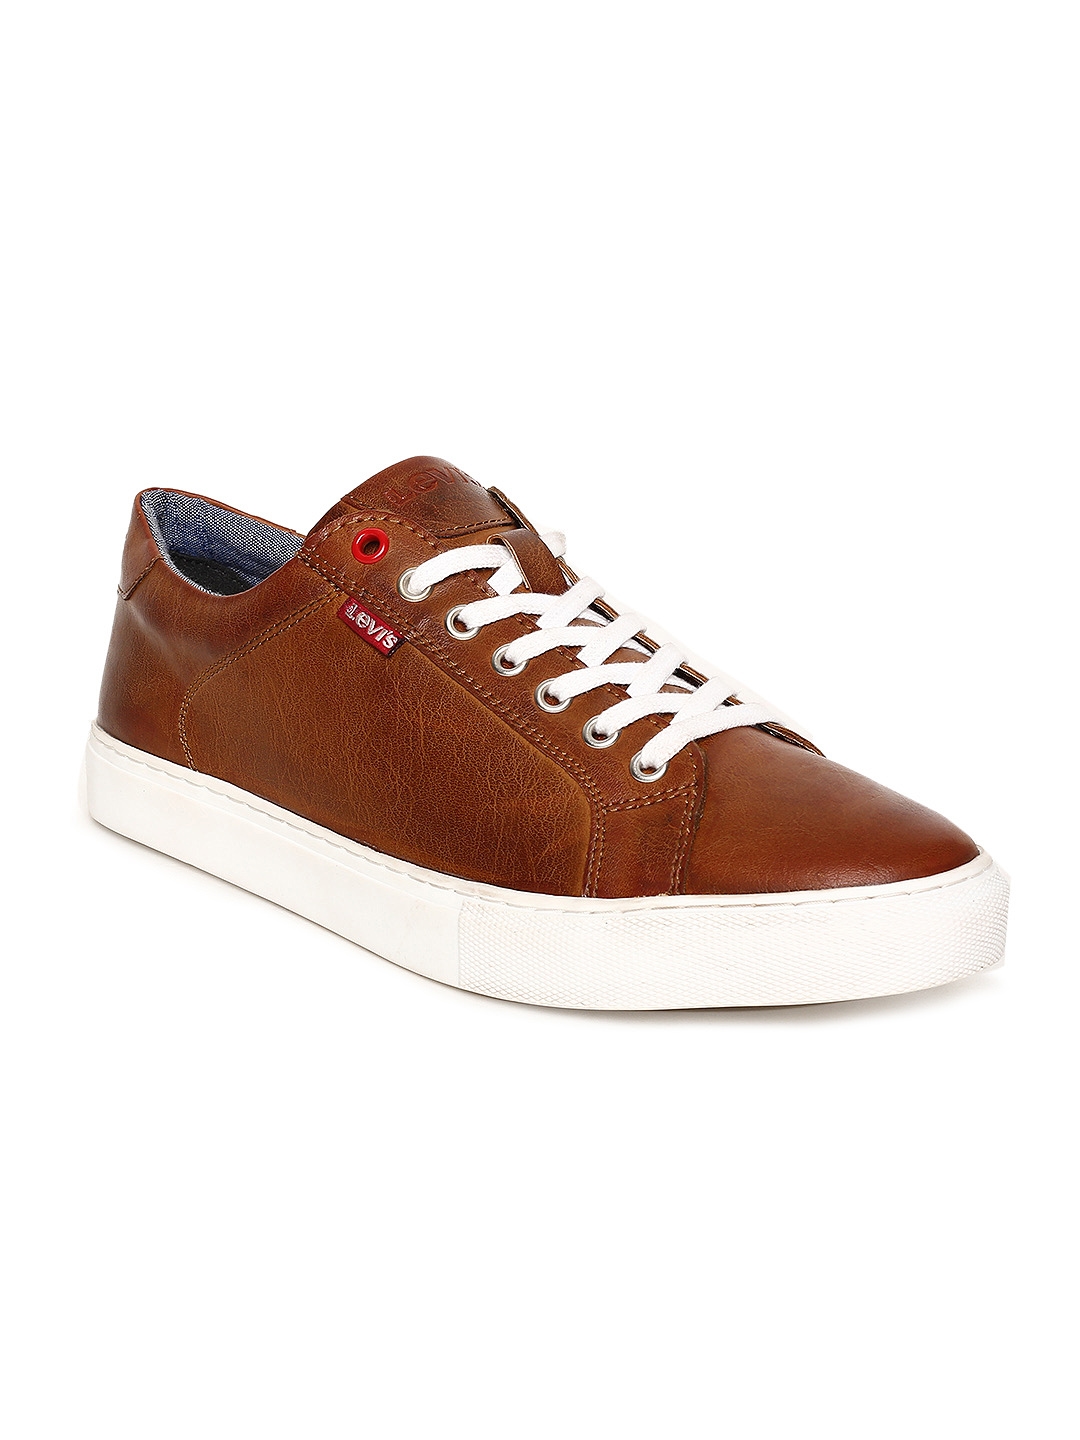 Buy Levis Men Tan Brown Prellude Sneakers - Casual Shoes for Men 2406327 |  Myntra